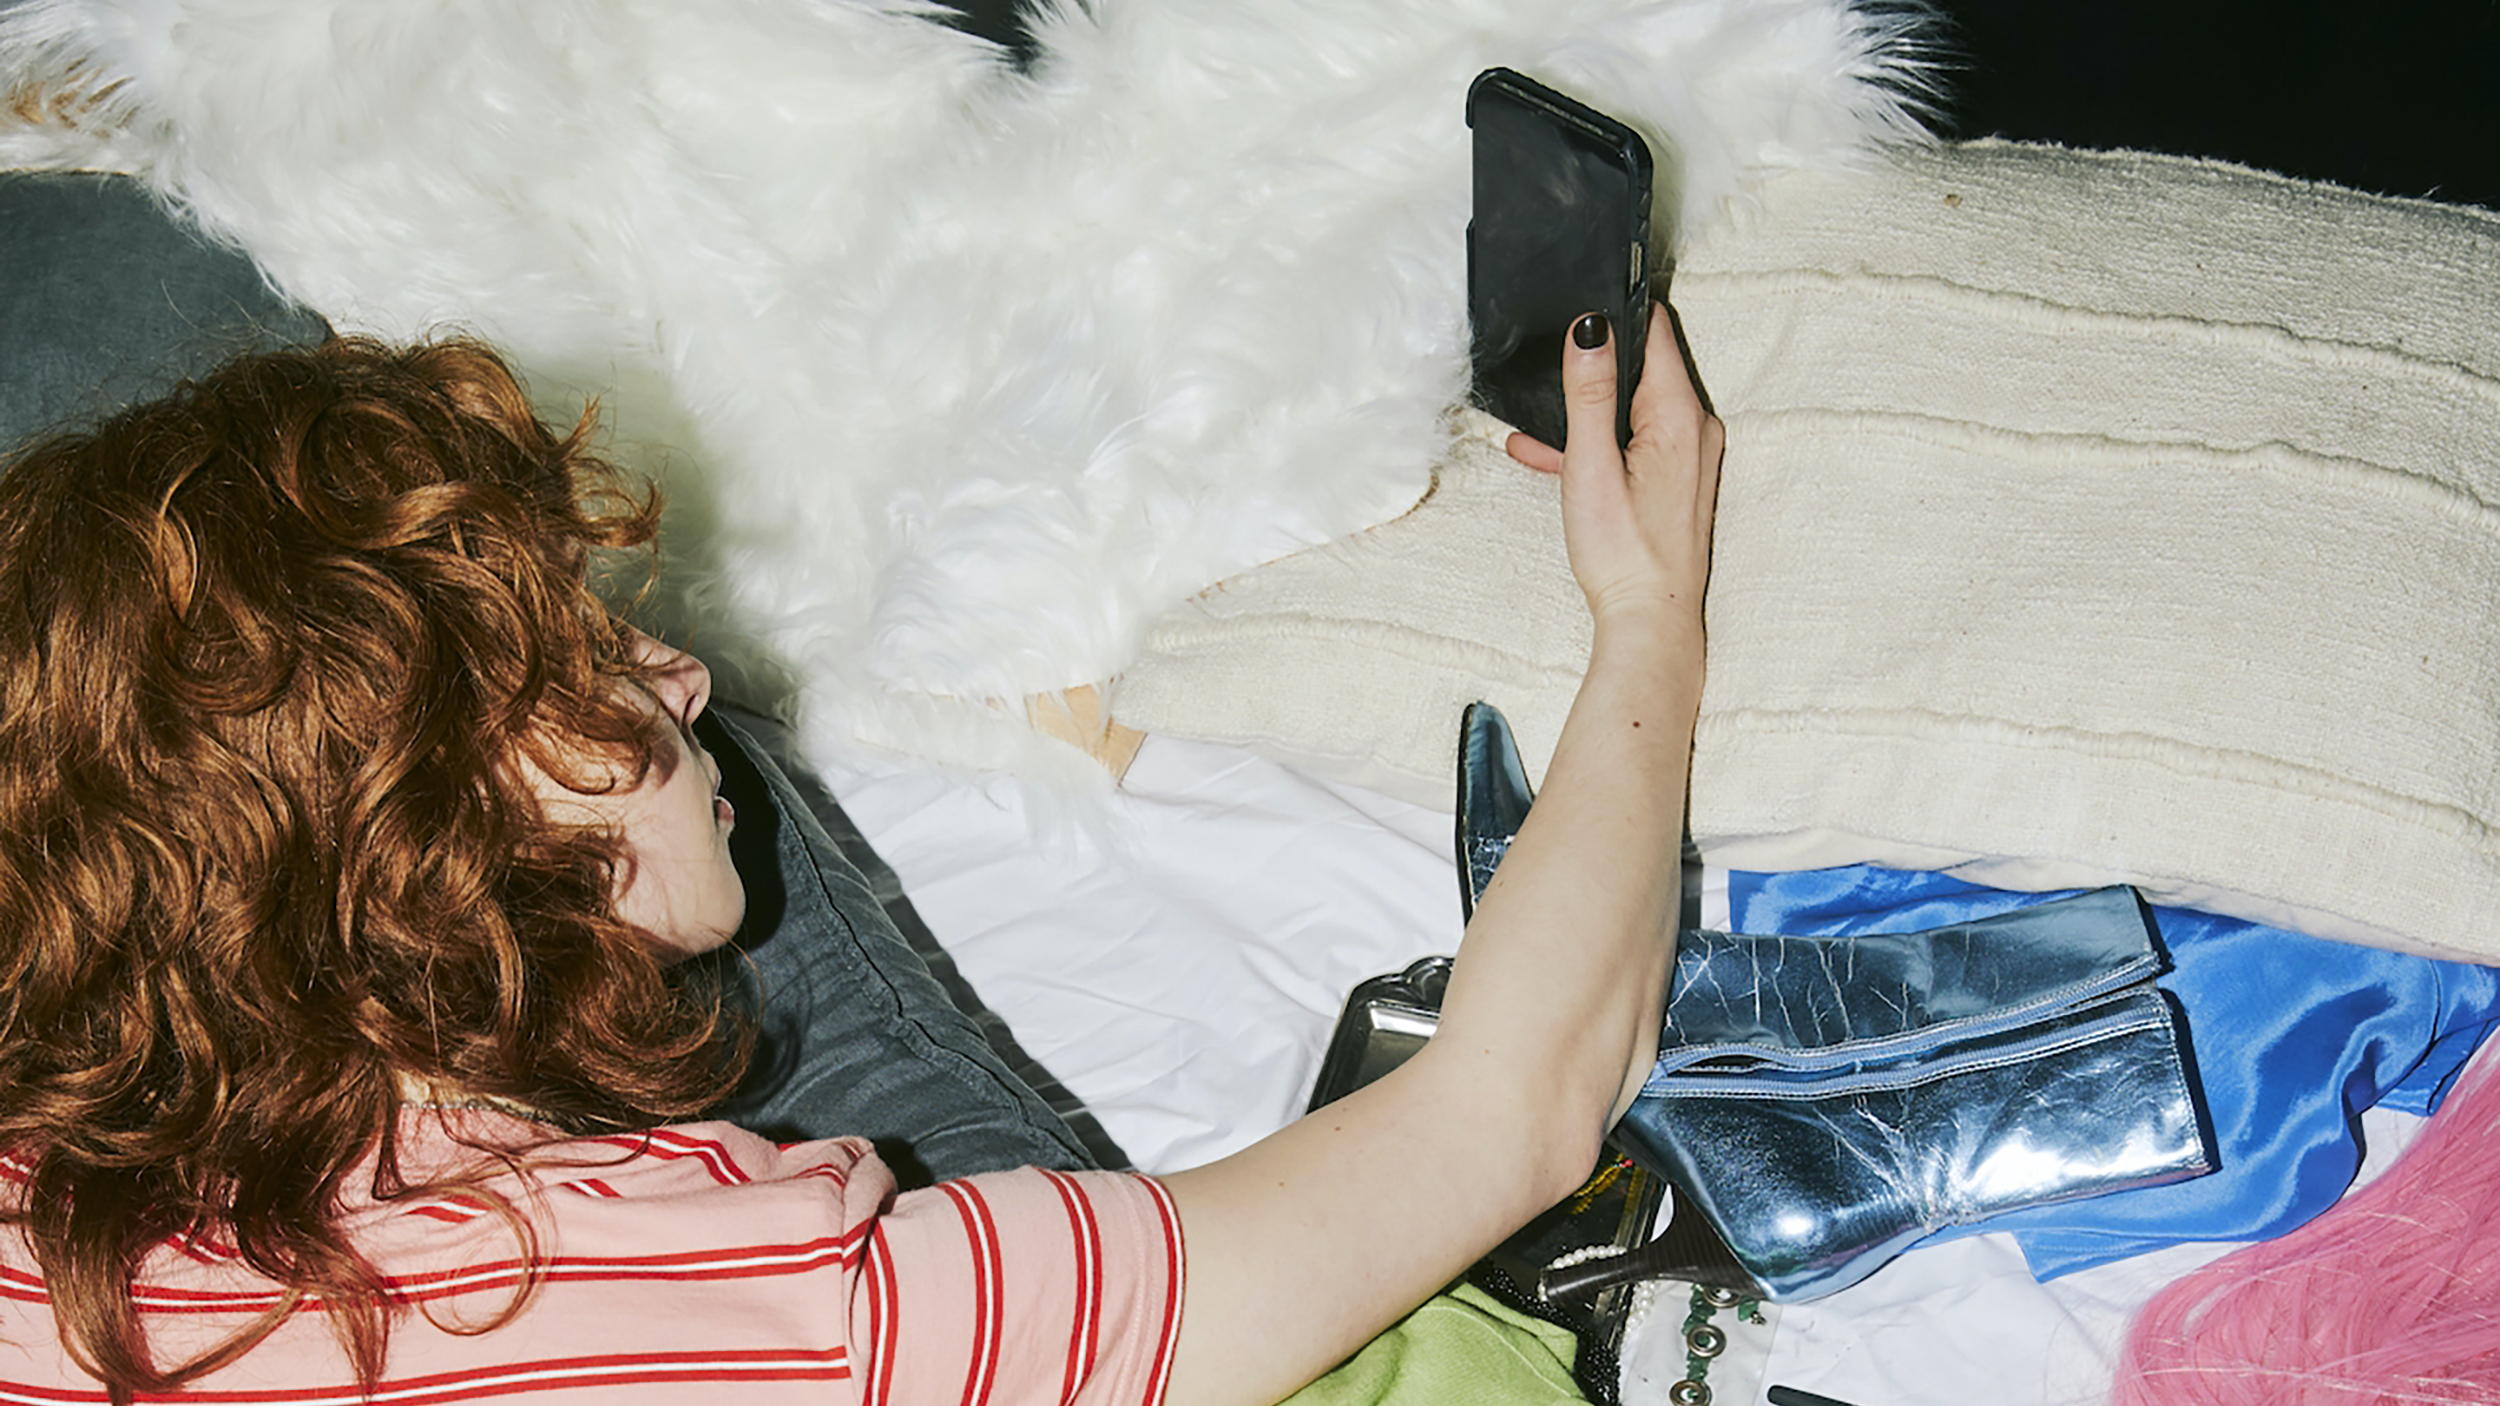 A Gen Z woman reshuffling on a bed with a cell phone.